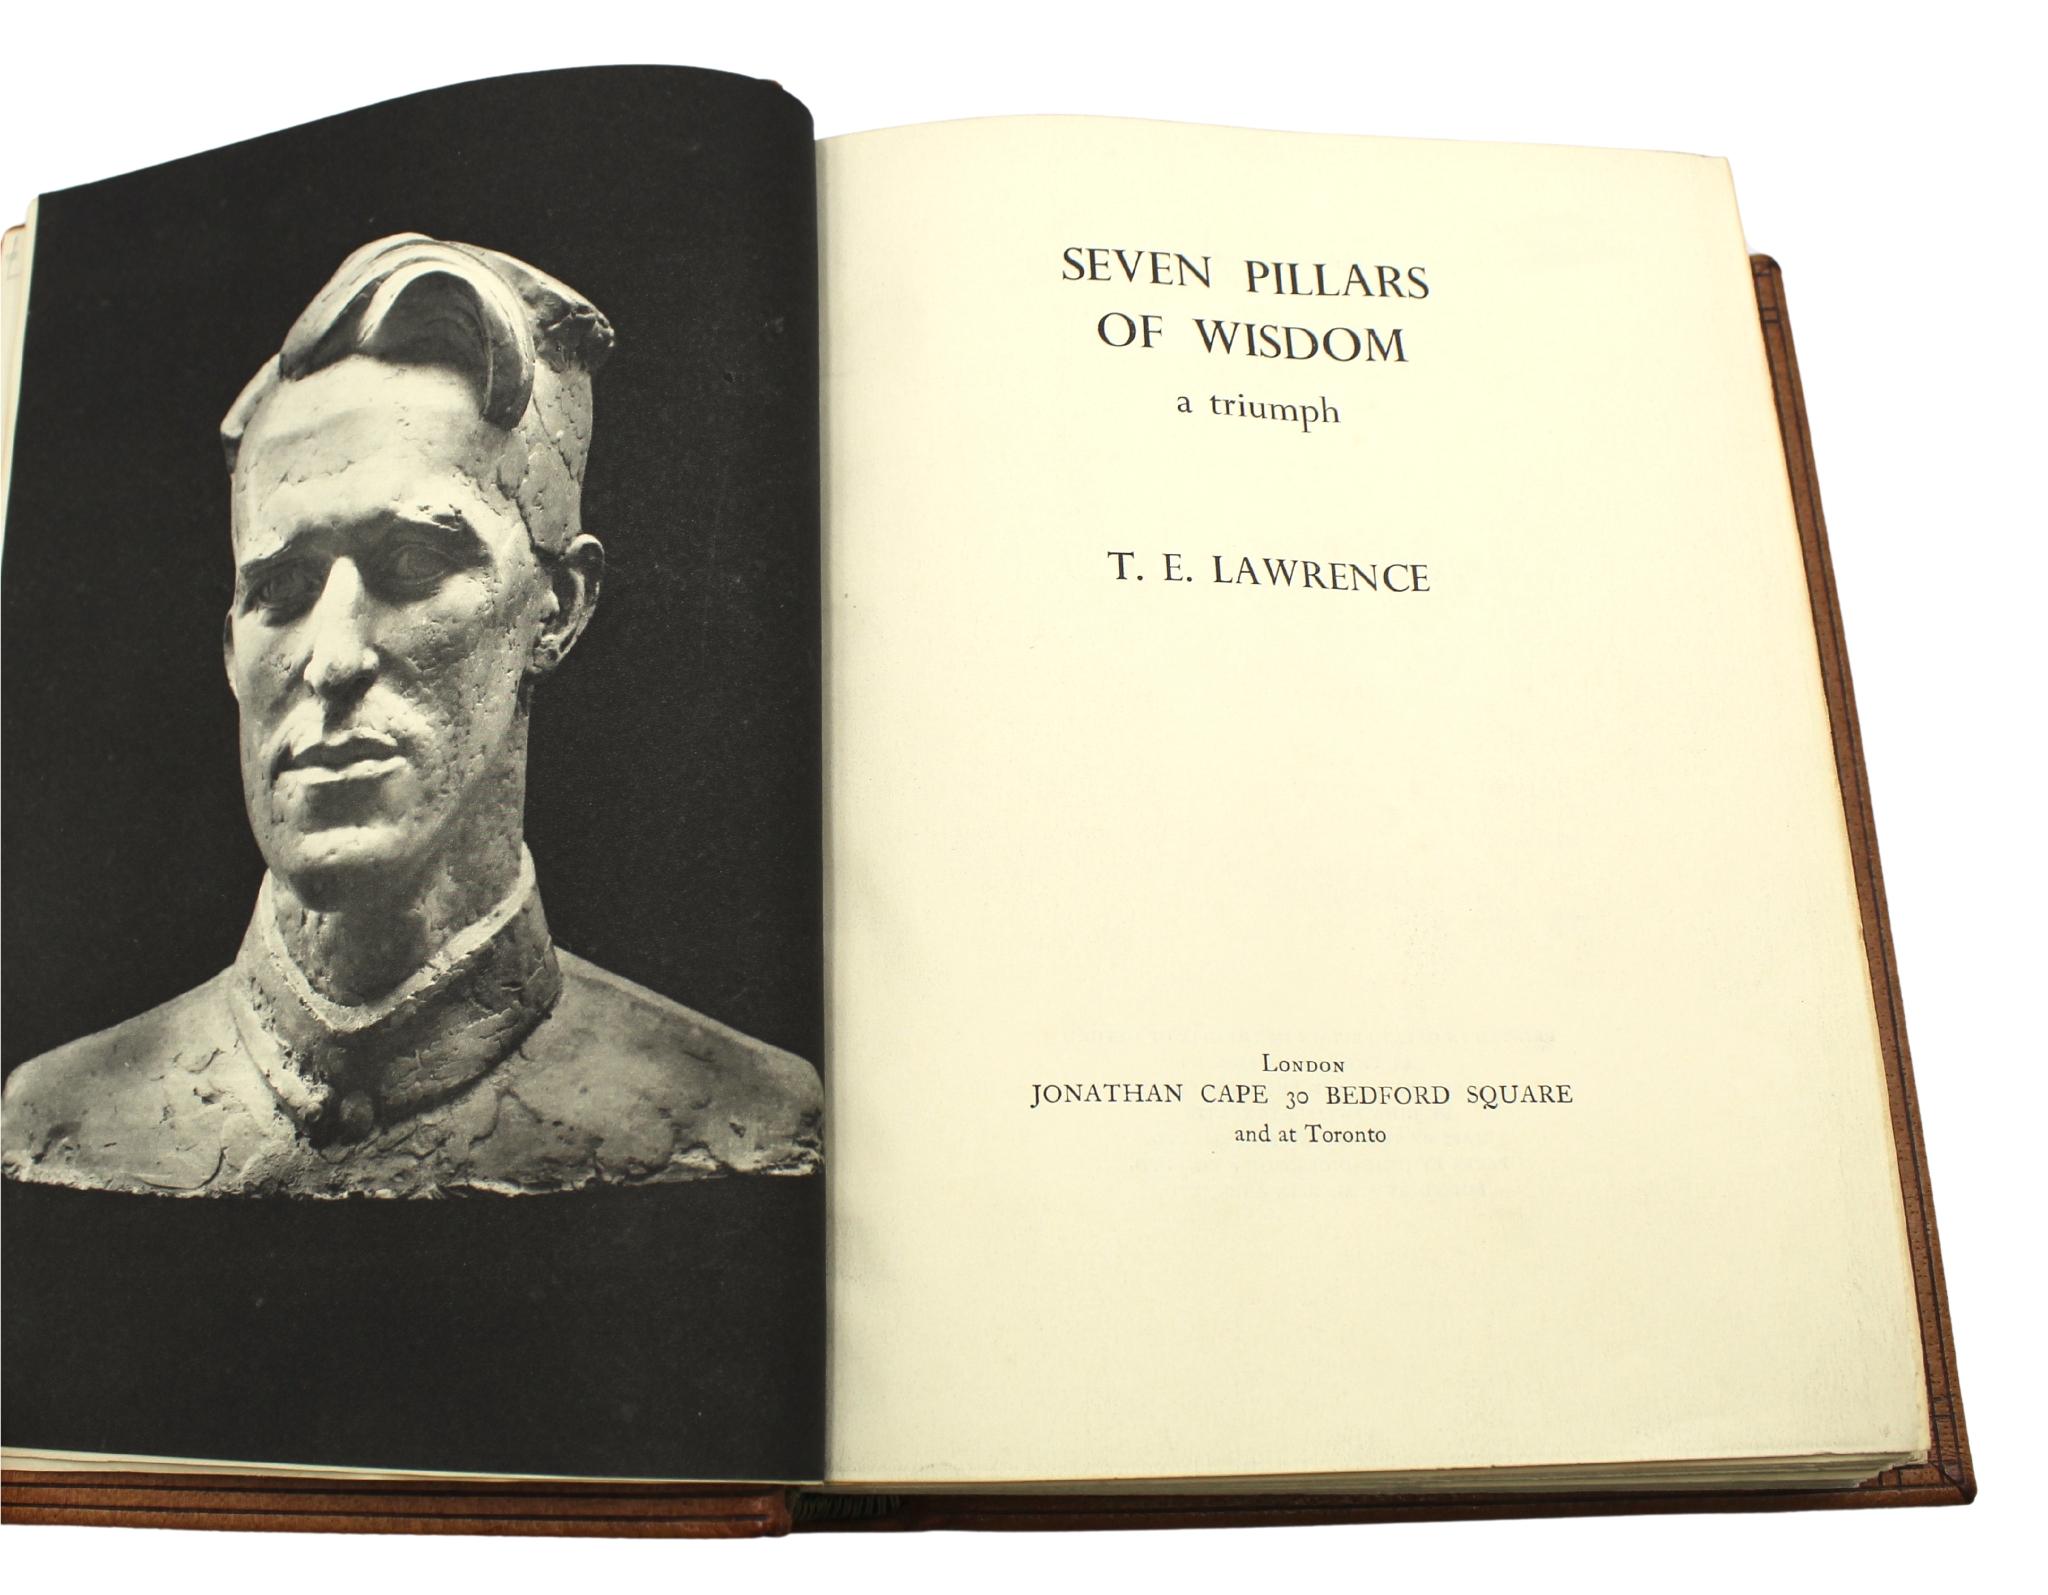 Lawrence, T. E. Seven Pillars of Wisdom, A Triumph. London: Jonathan Cape, (1935). First Trade Edition. Quarto. Illustrated, Bound in full brown leather, silver and black embossed illustration to the front cover, top edges gilt. Presented with a